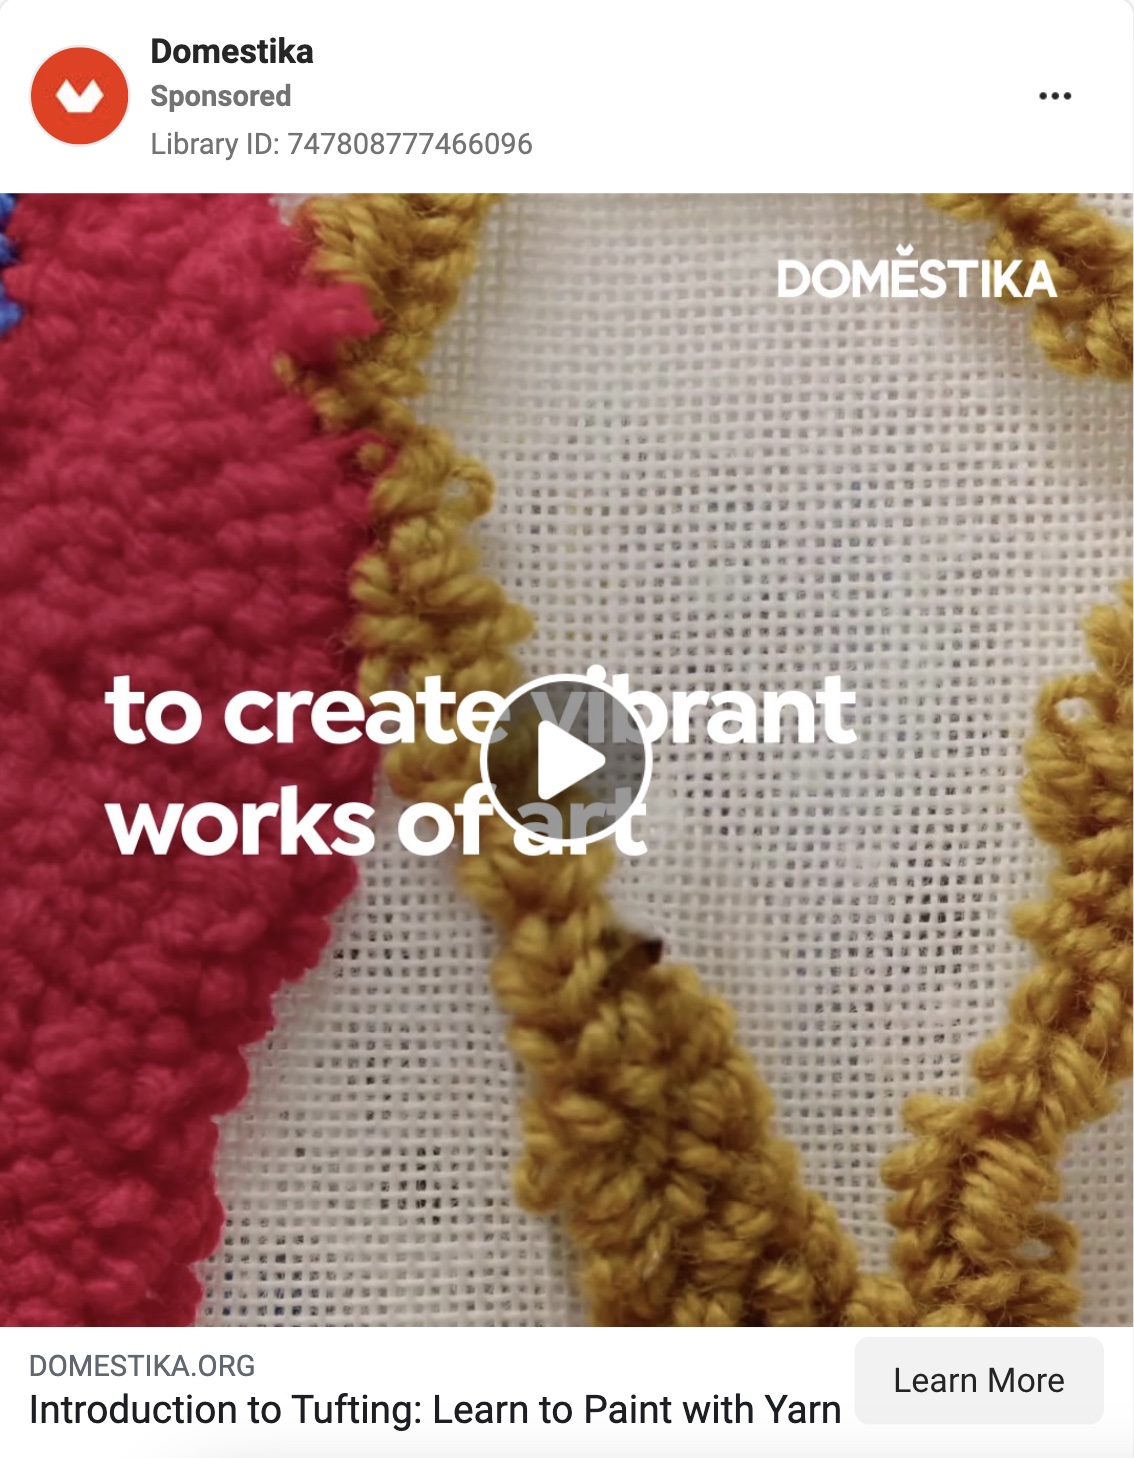 a Facebook video advertisement  featuring a Domestika online course